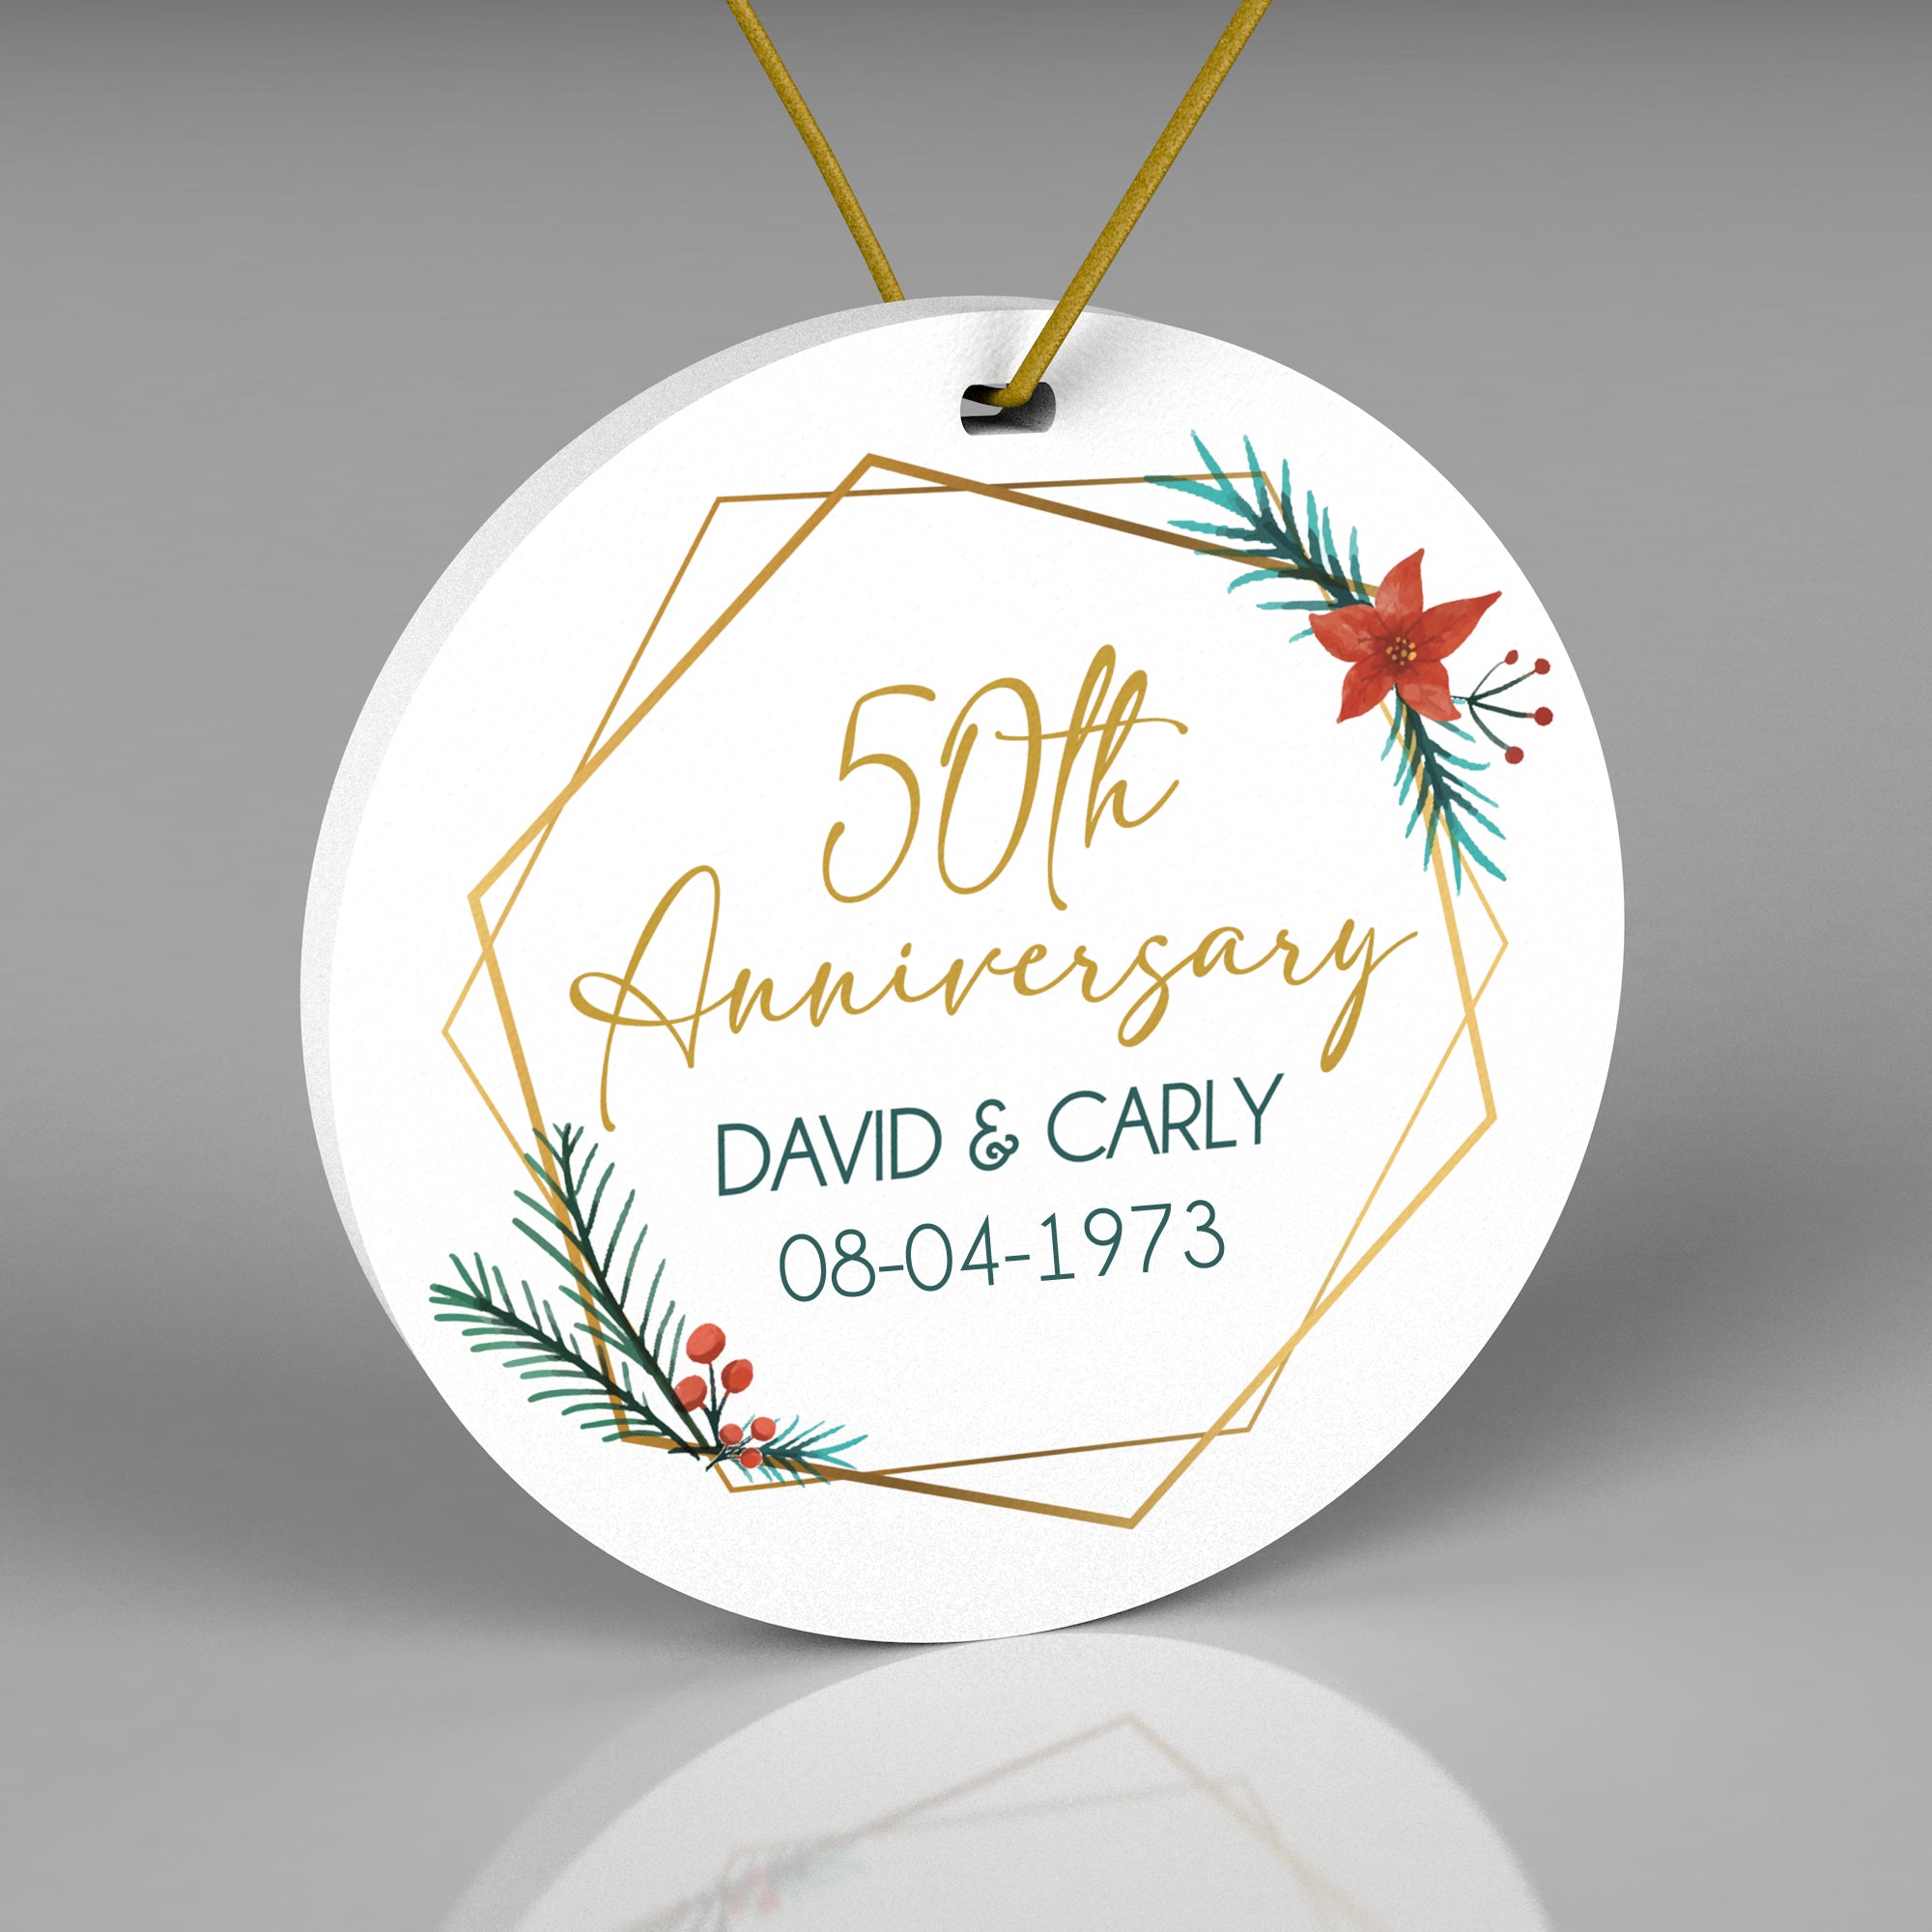 8-Perfect-Gifts-for-Couple-Celebrating-a-50th-Wedding-Anniversary-3 |  Appreciation & Recognition Ideas